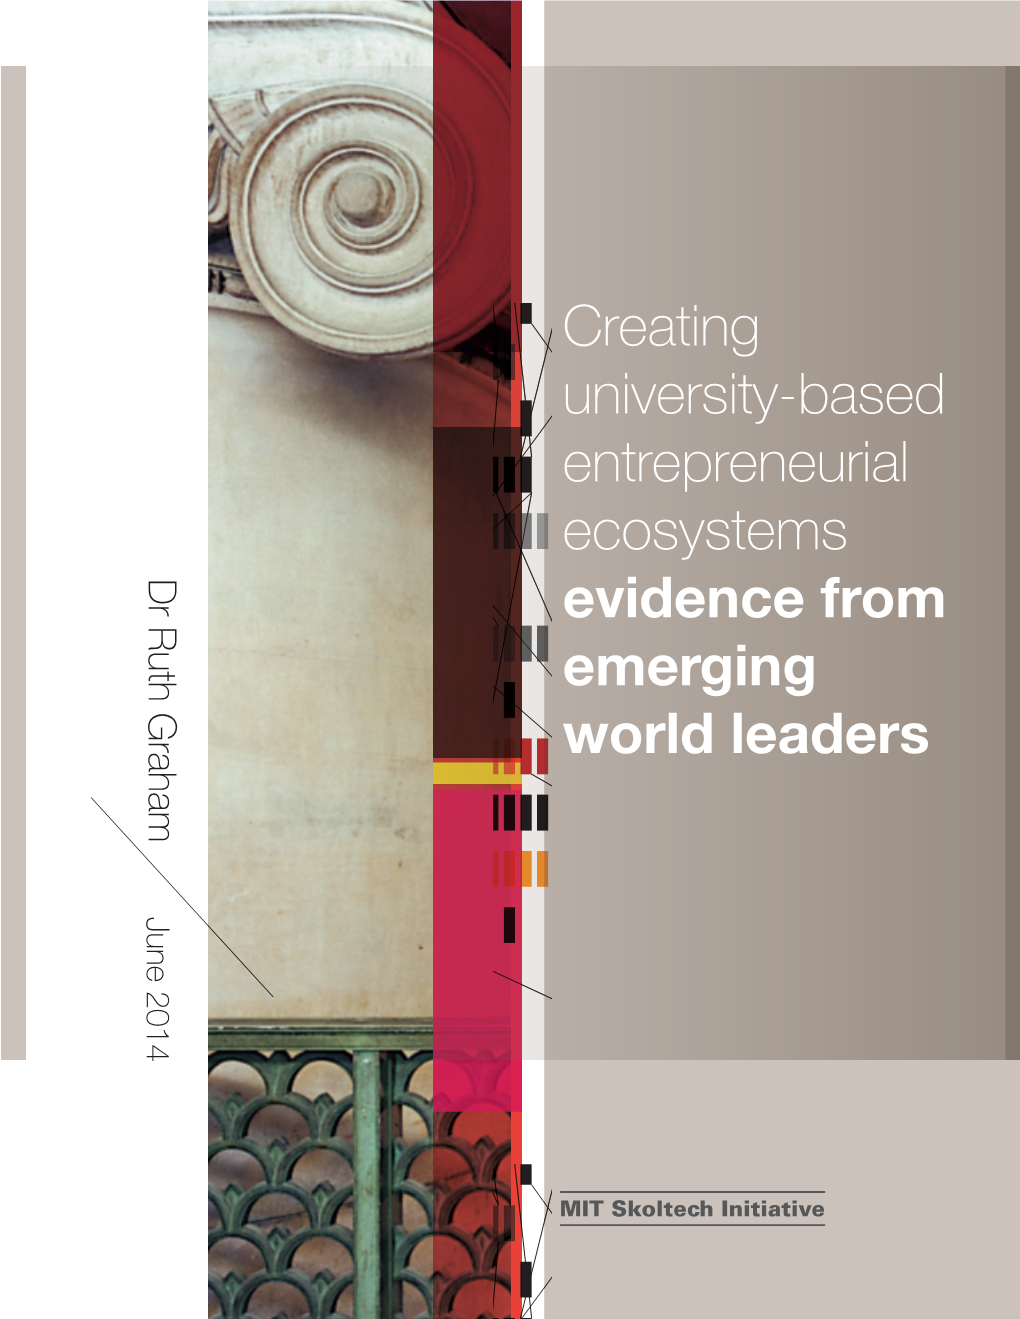 Creating University-Based Entrepreneurial Ecosystems from Evidence Emerging World Leaders